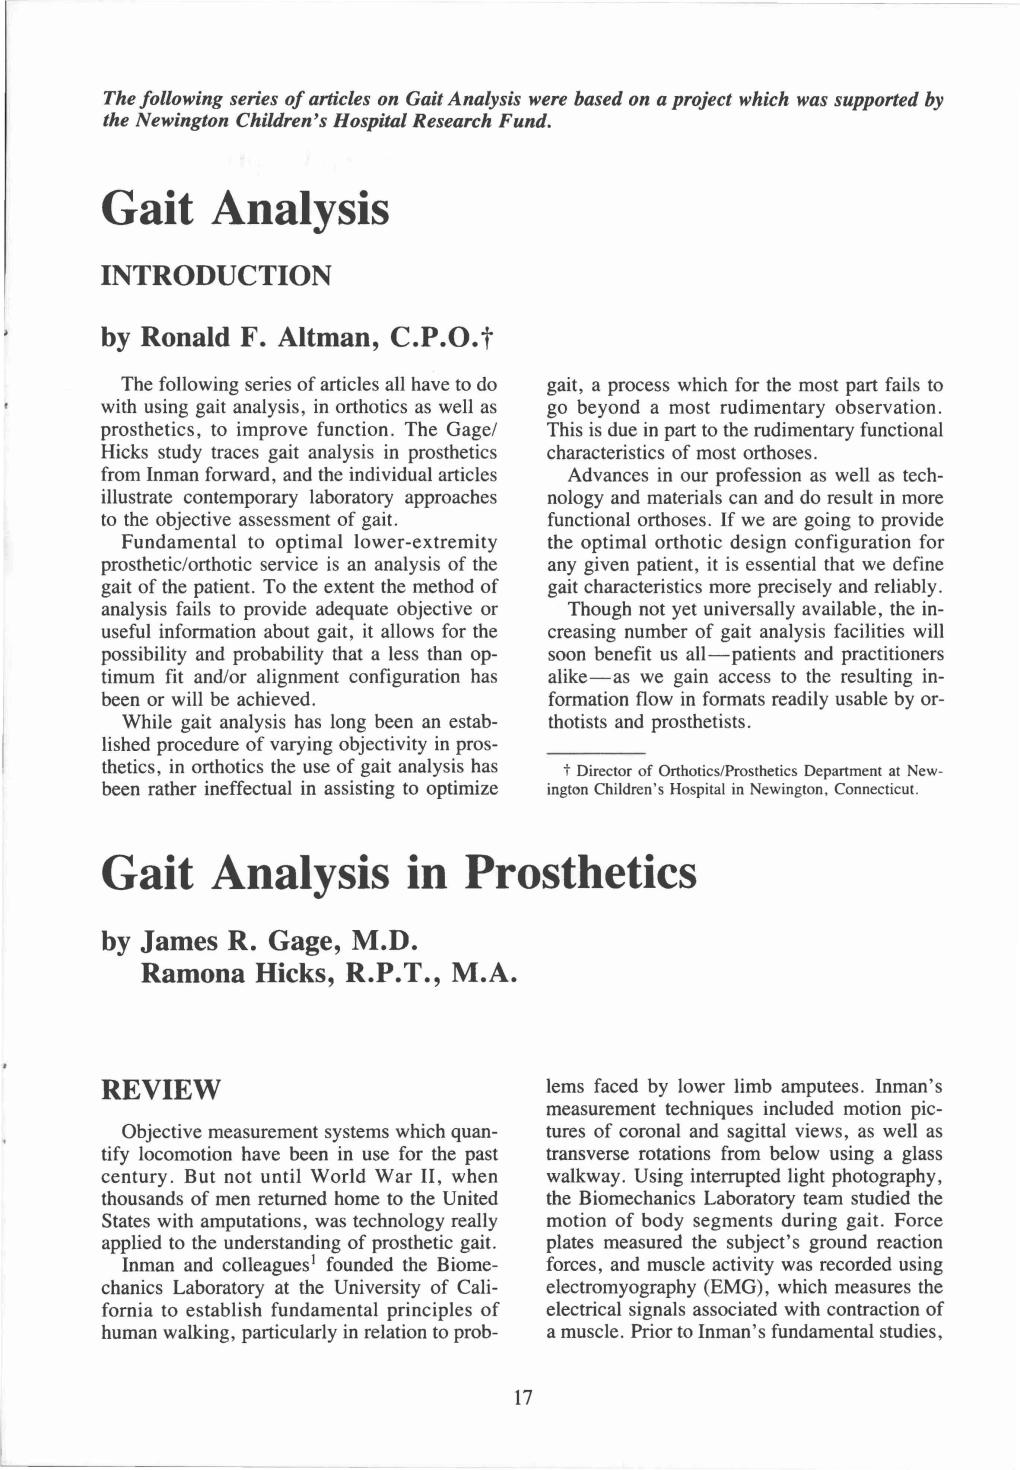 Gait Analysis in Prosthetics by James R